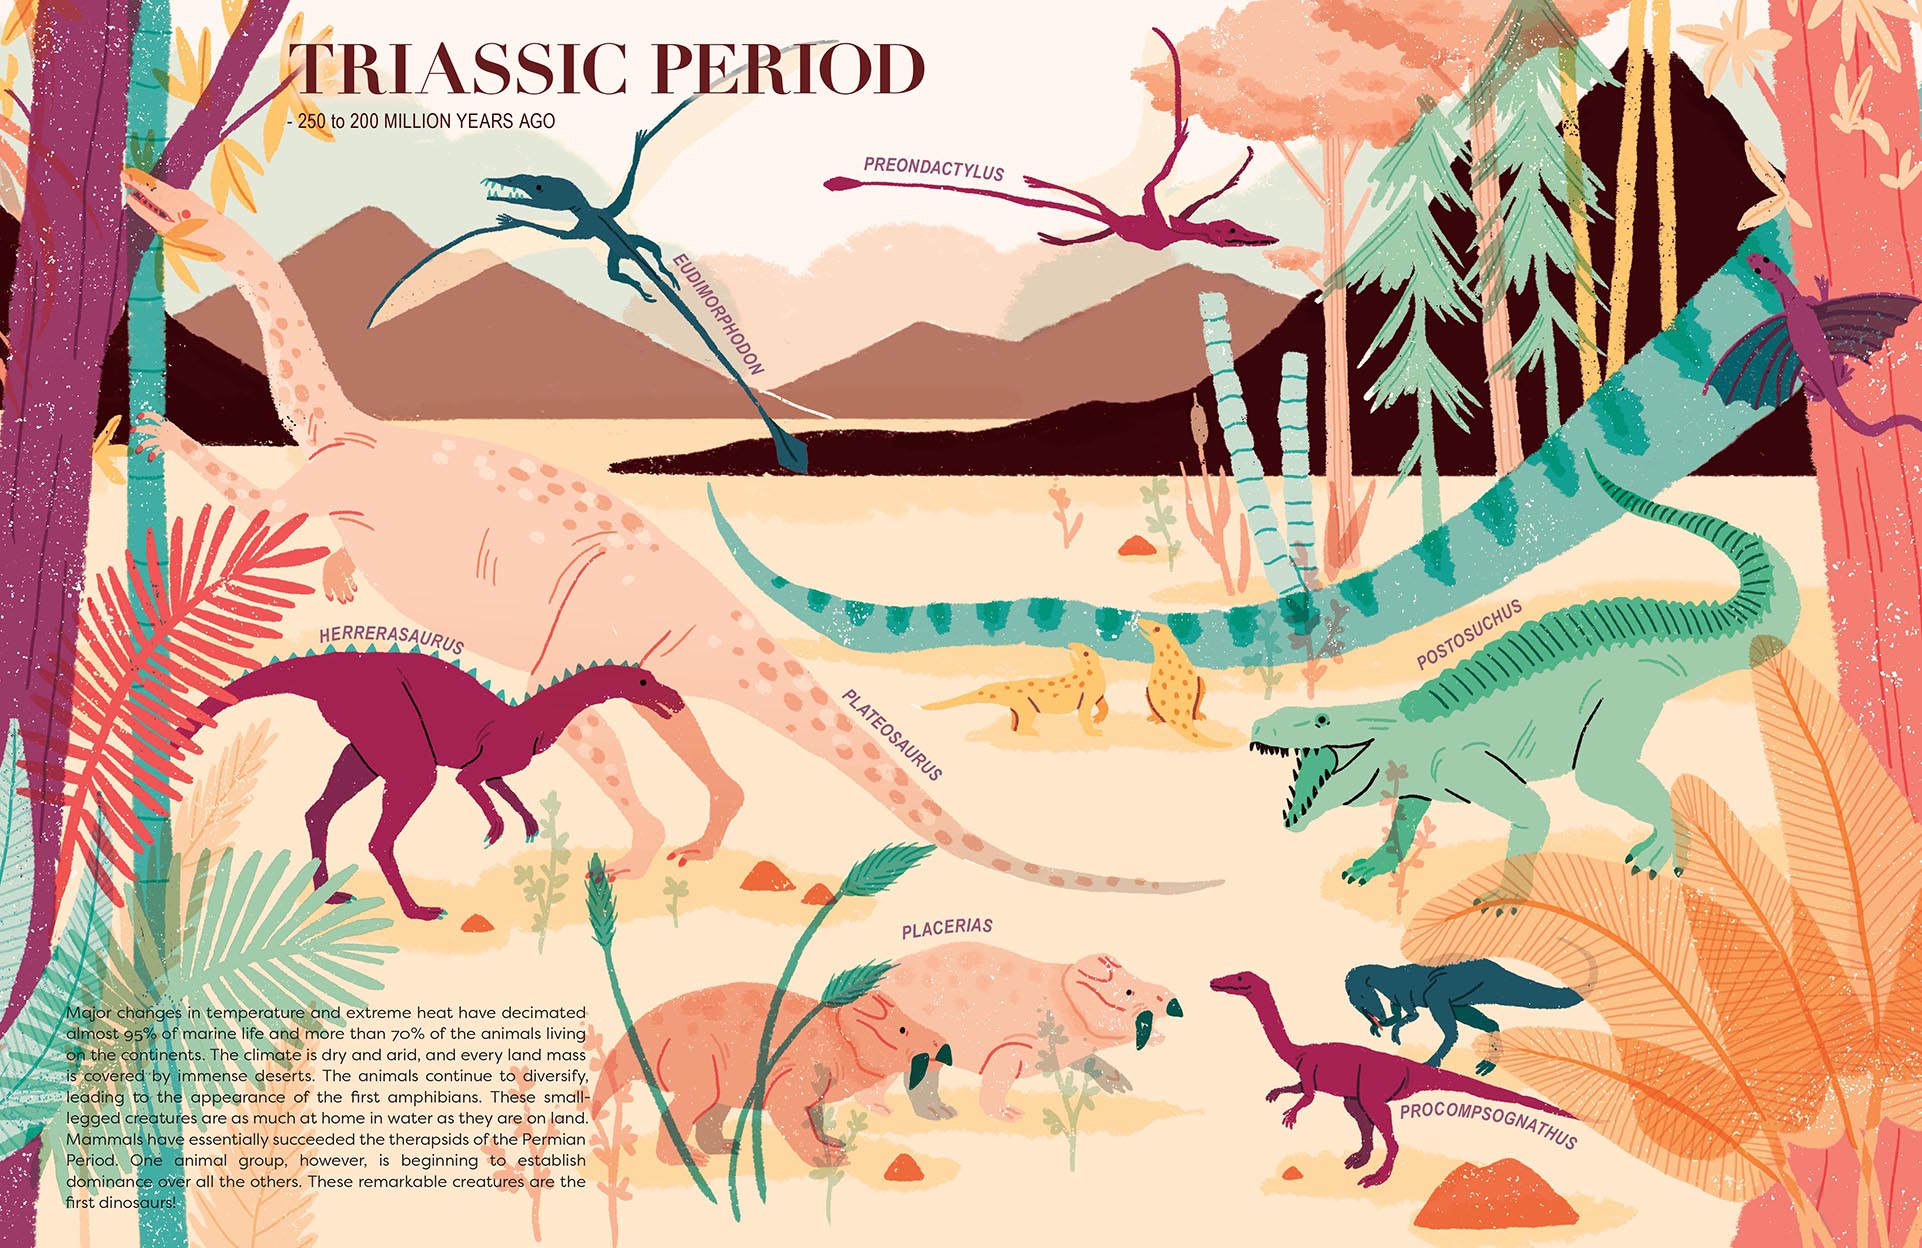 The Triassic spread from Brief History of Life on Earth by Clémence Dupont